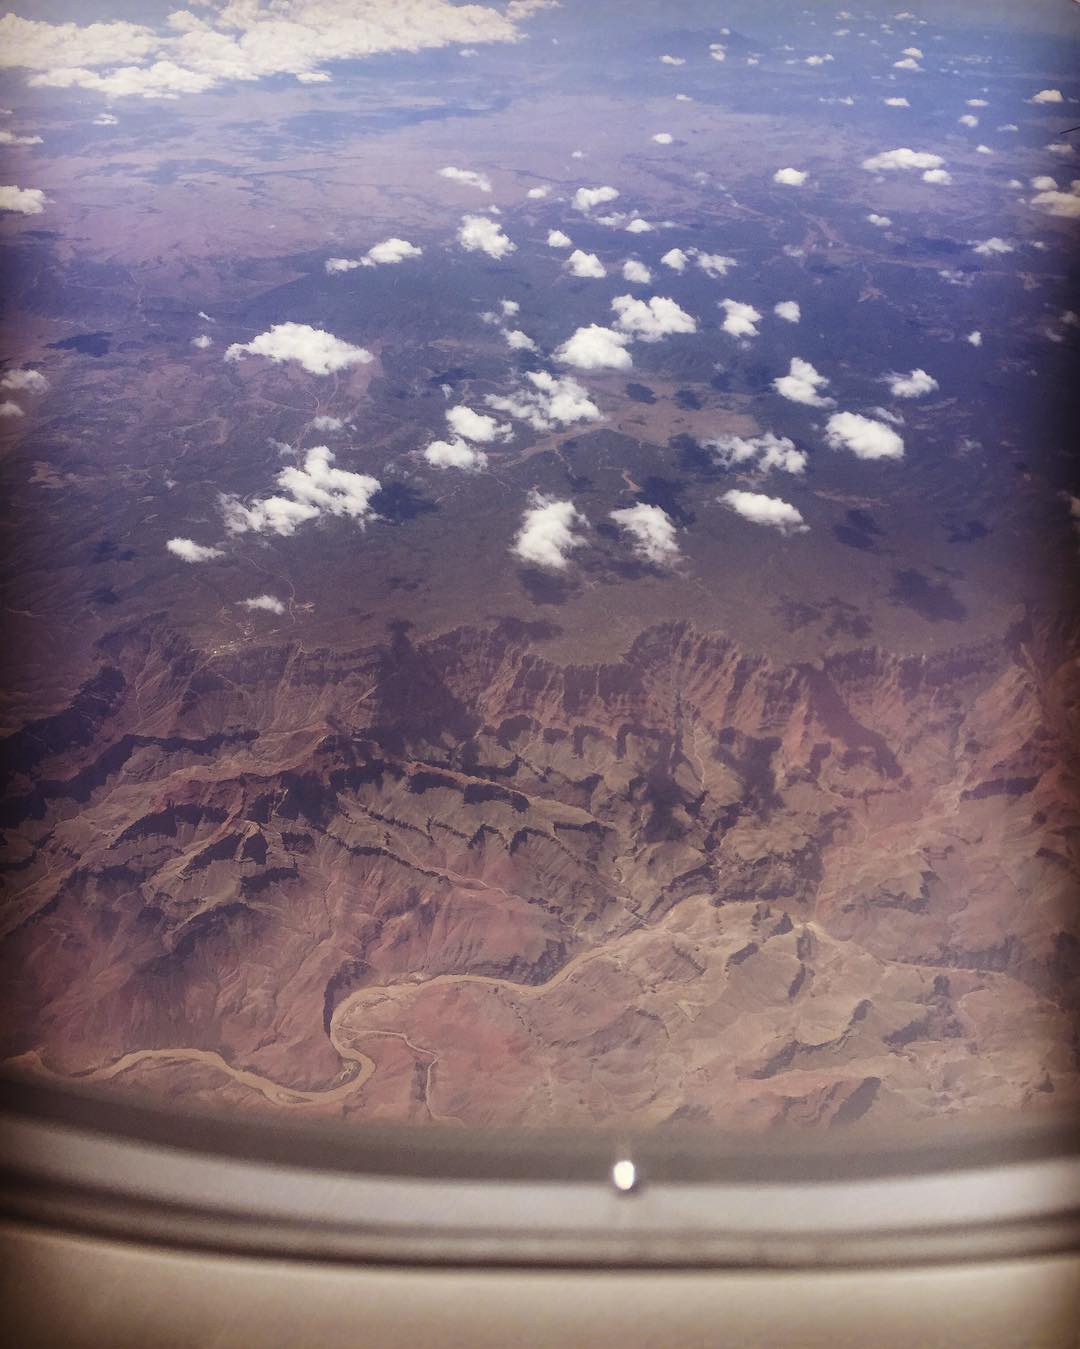 The Grand Canyon from 30k feet!! So amazing.....Can you imagine how many rare Pokemon are down there, it's worth the risk guys #beautifulnatureposttaintedby2016bs